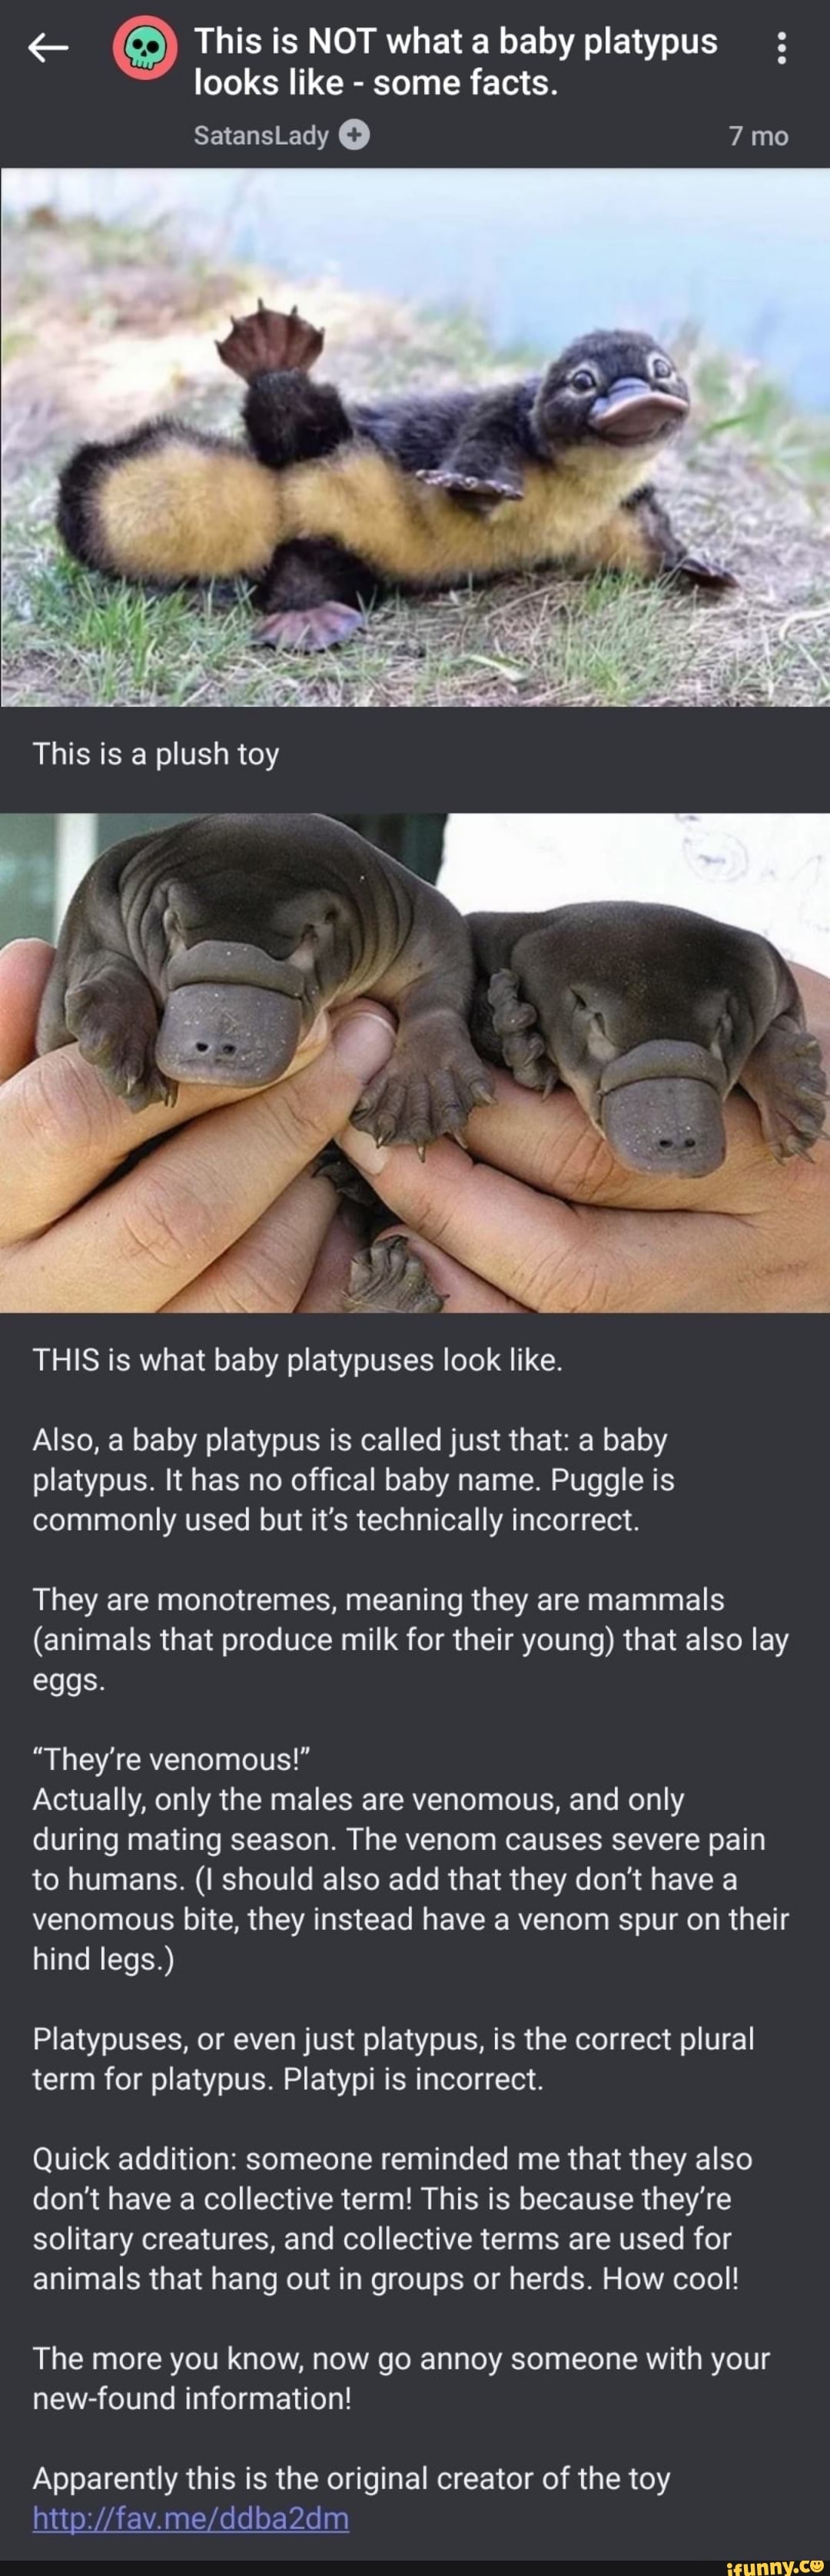 "E This is NOT what a baby platypus): looks like some facts. 